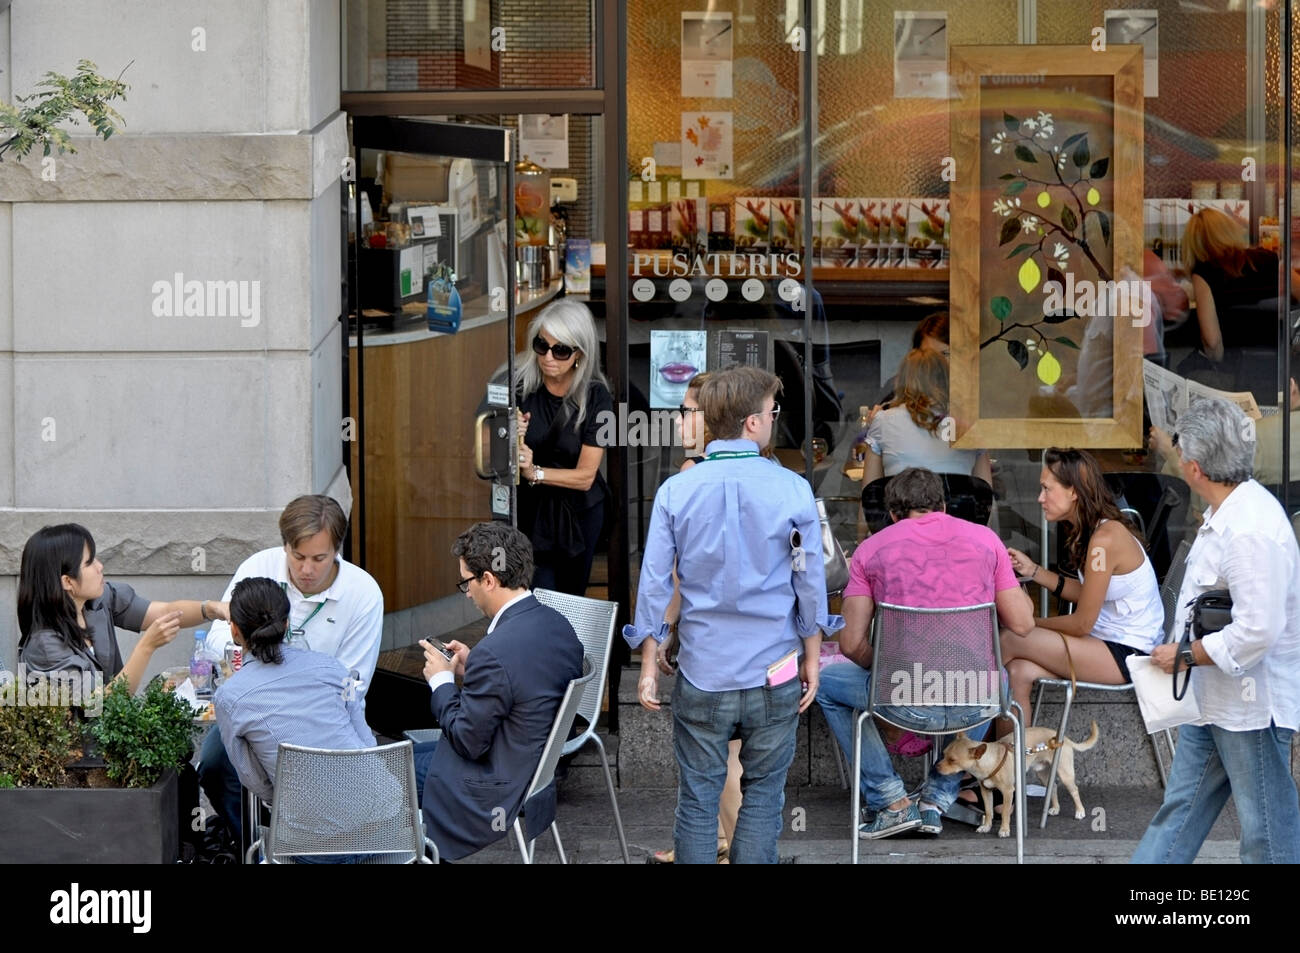 People dining/lunching outdoors on the Patio of Pusateri's Grocery Store - Yorkville, Ontario Stock Photo